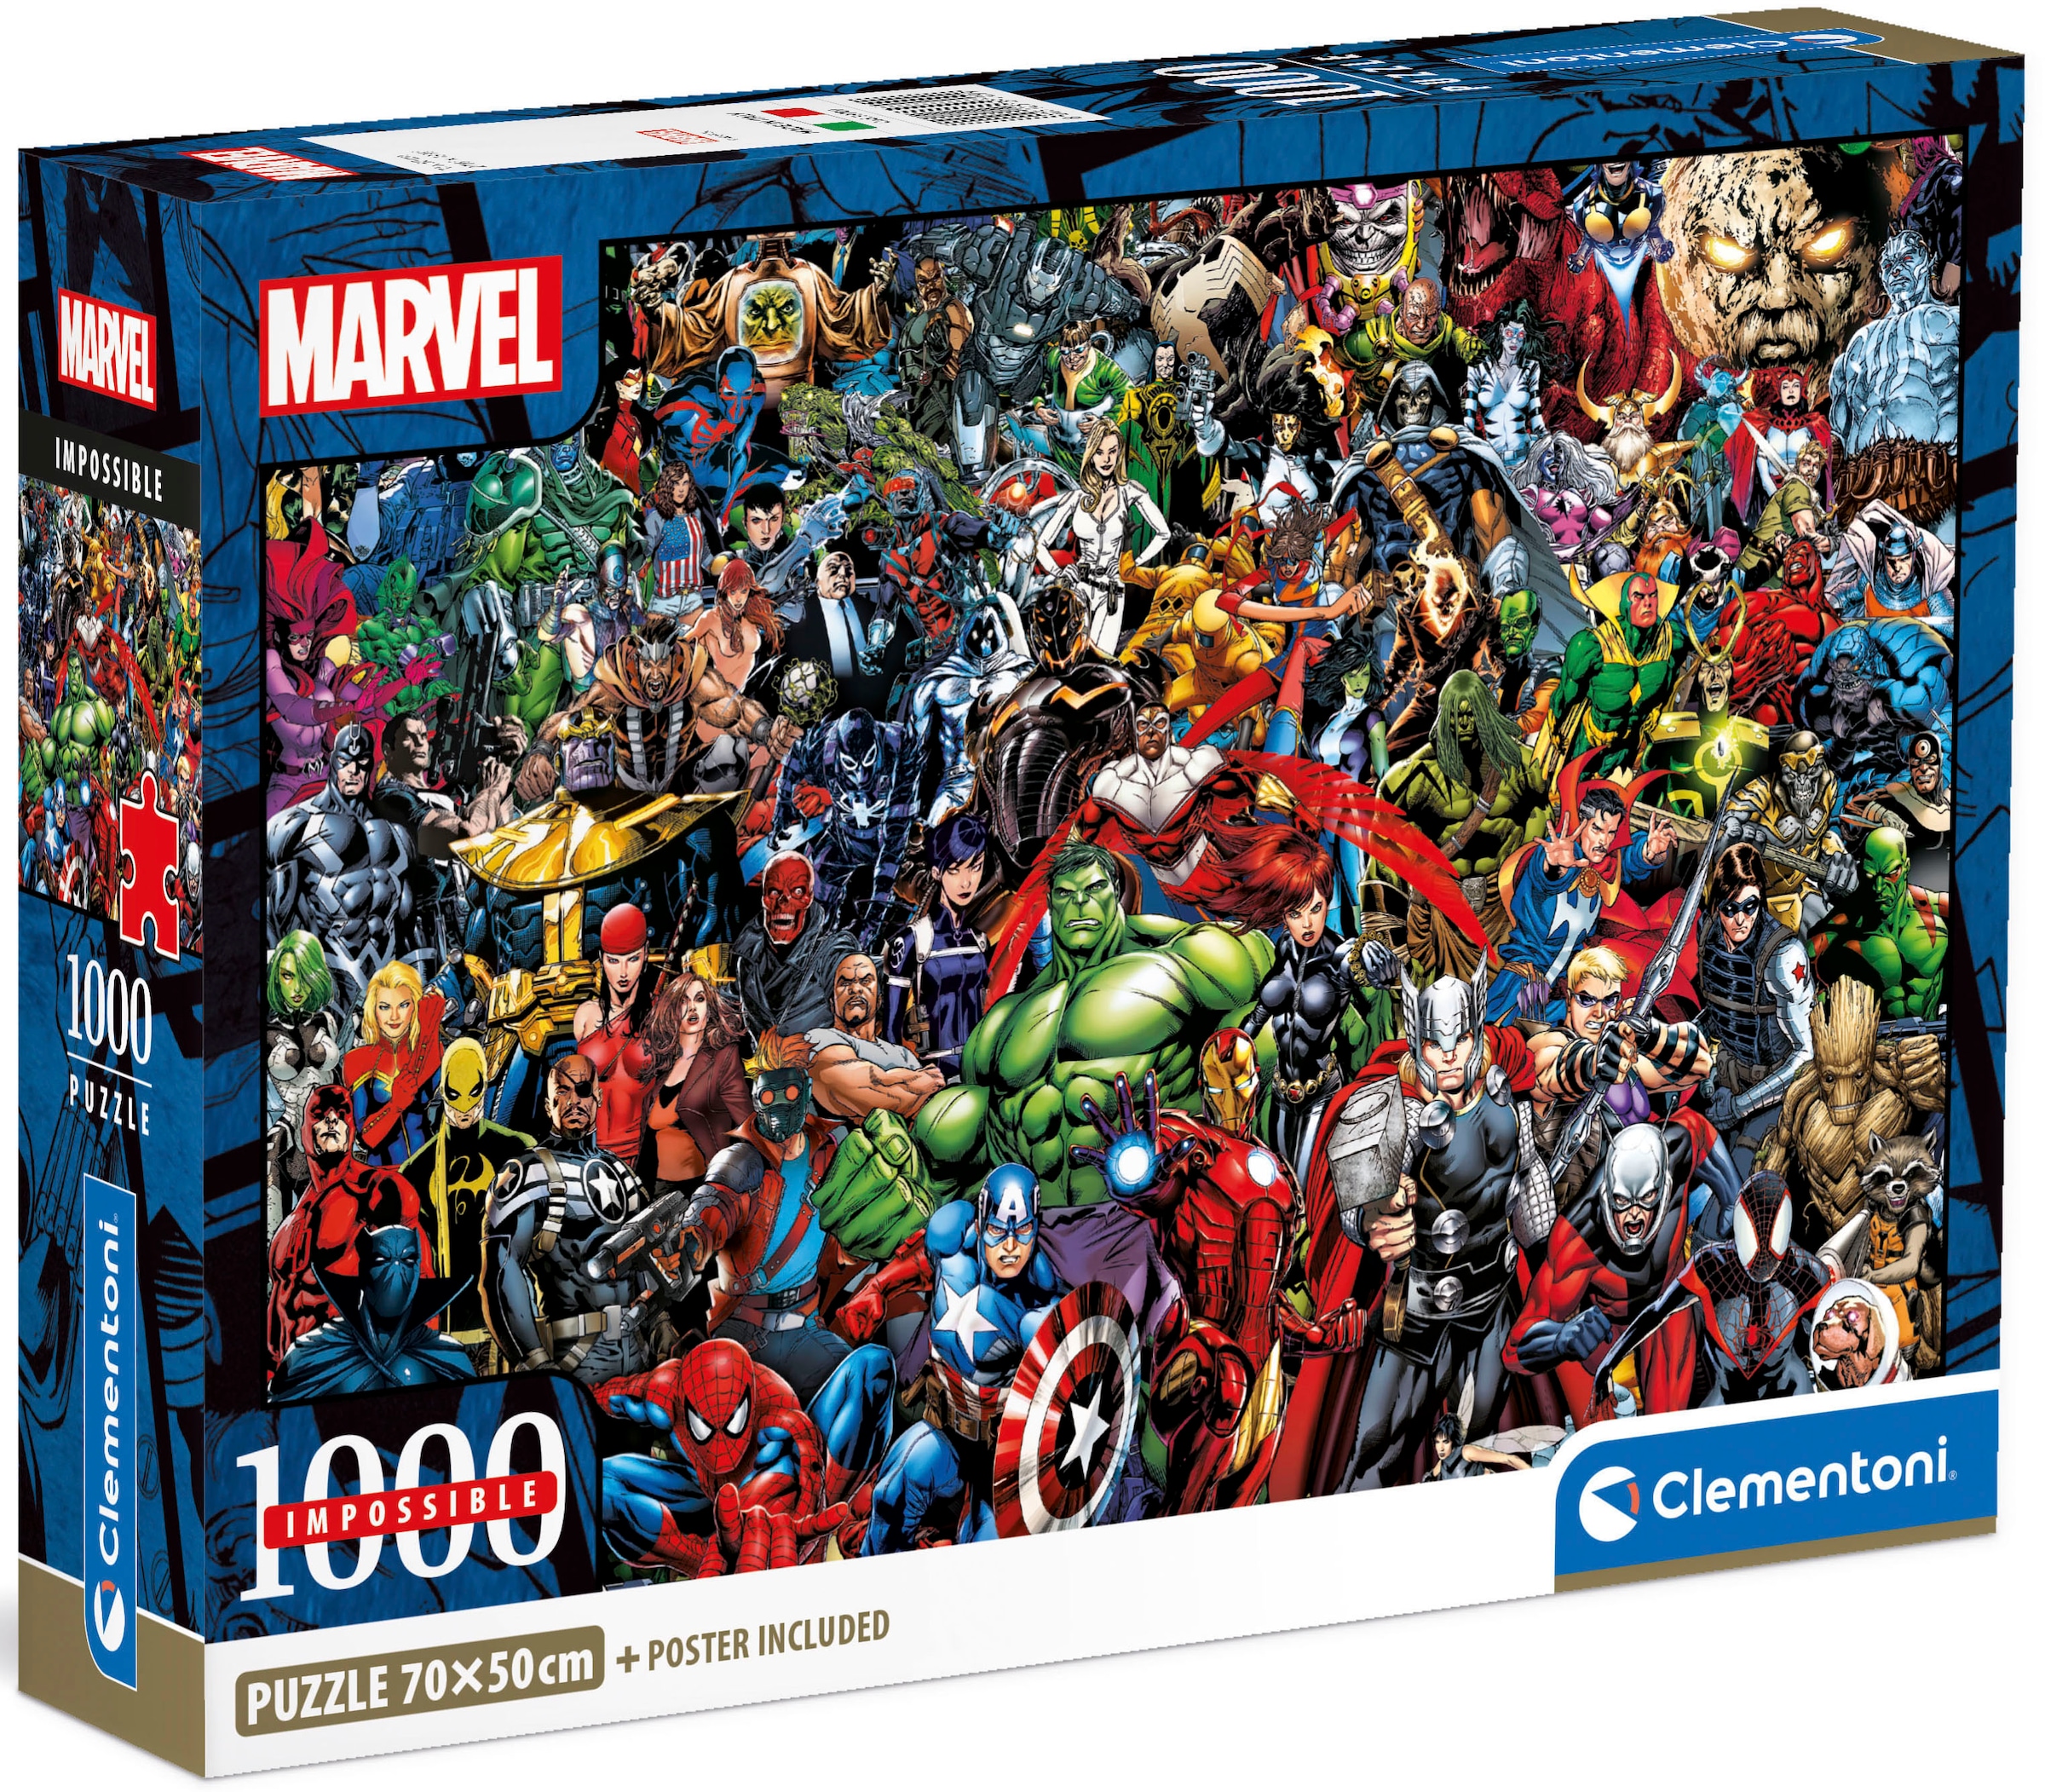 Puzzle »Impossible, Marvel Universe Compact, mit neuer Compact Box«, Made in Europe;...